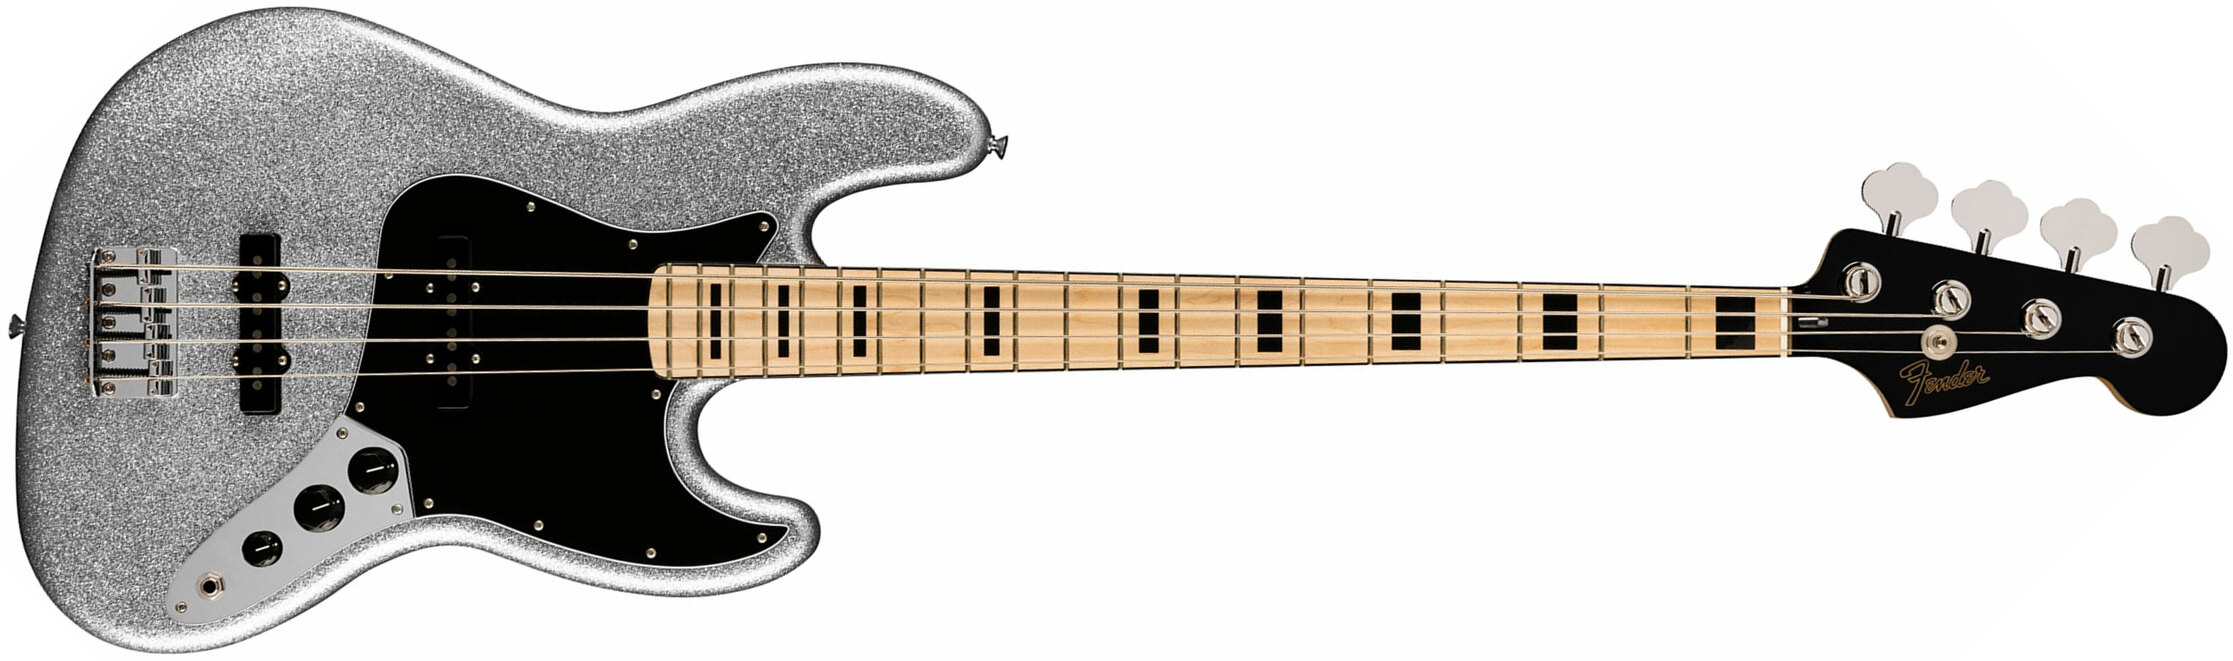 Fender Mikey Way Jazz Bass Ltd Signature Mex Mn - Silver Sparkle - Solidbody E-bass - Main picture